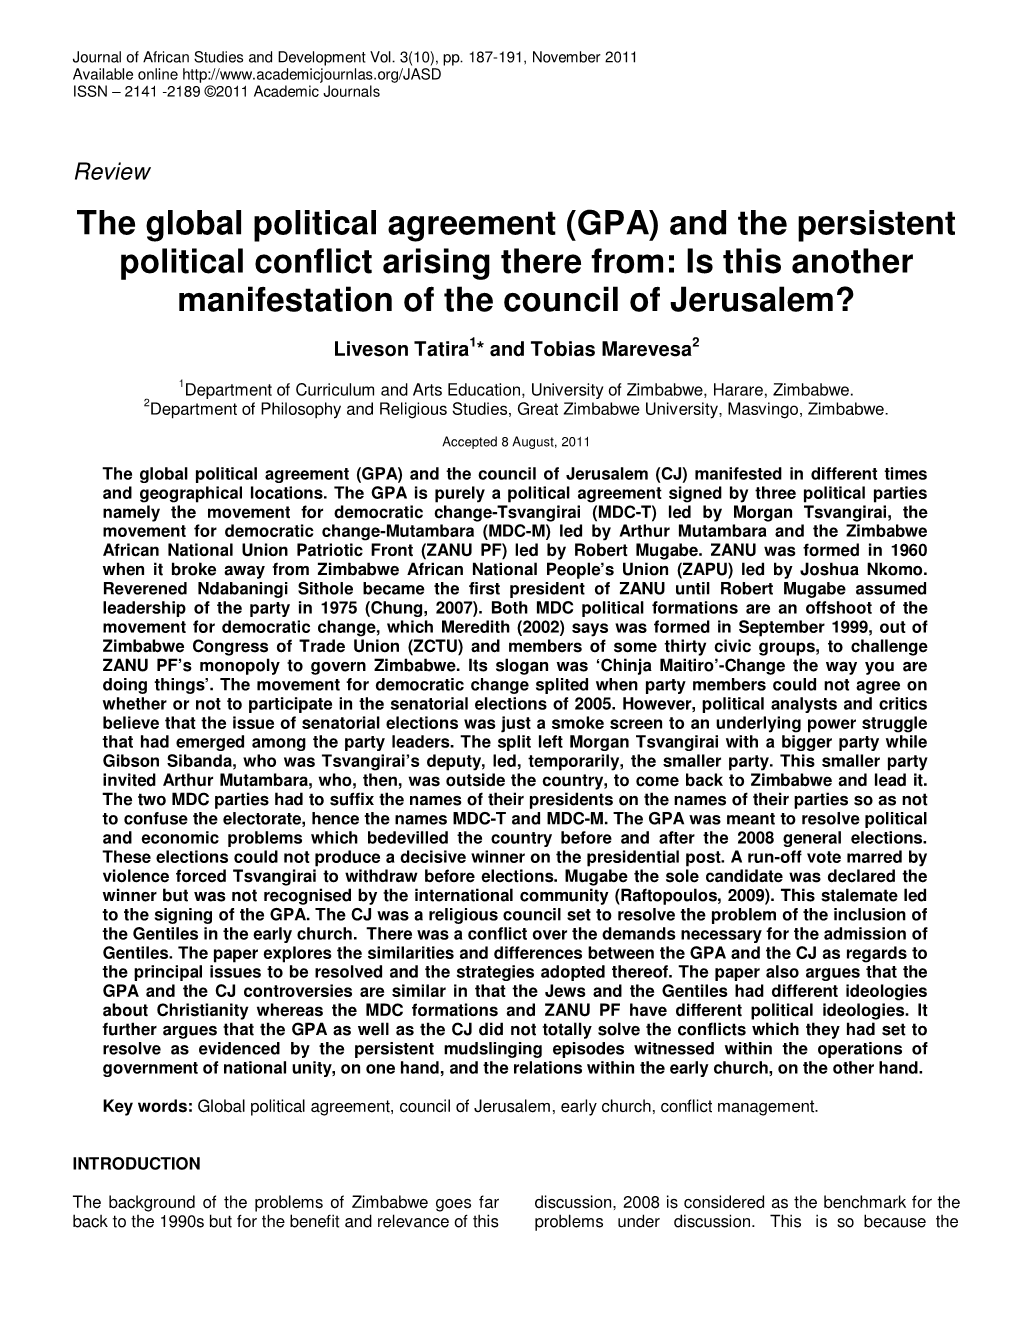 The Global Political Agreement (GPA) and the Persistent Political Conflict Arising There From: Is This Another Manifestation of the Council of Jerusalem?